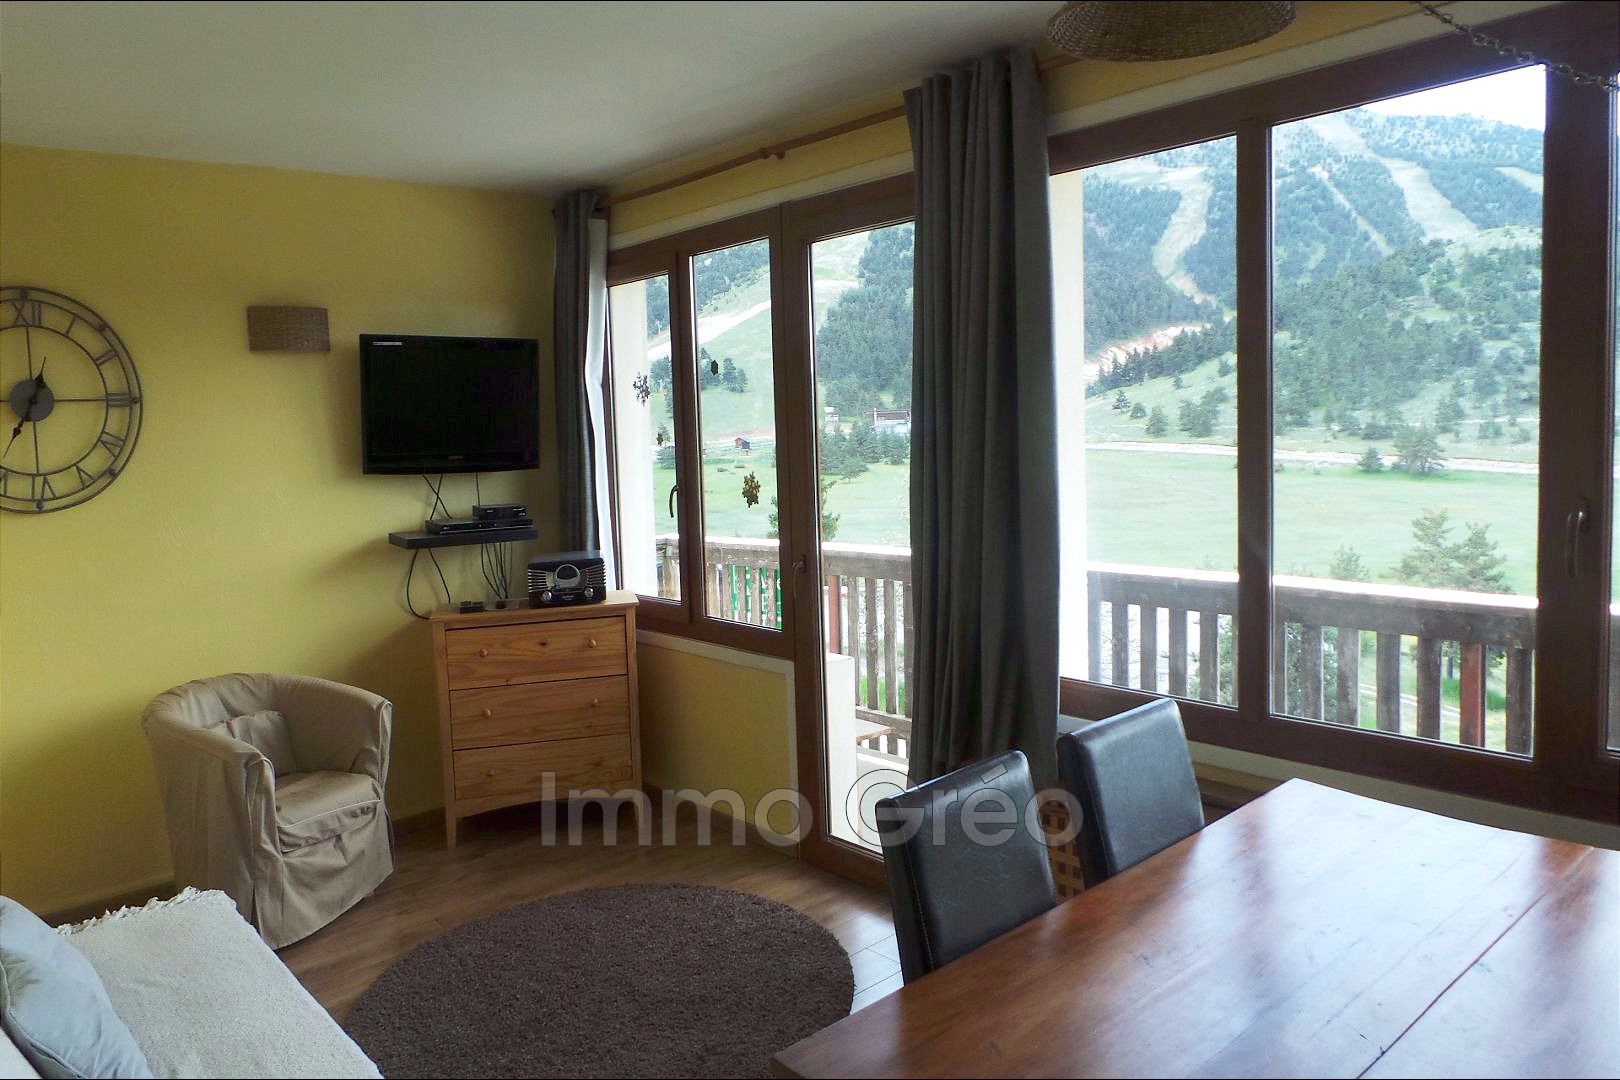 location chalet greolieres les neiges